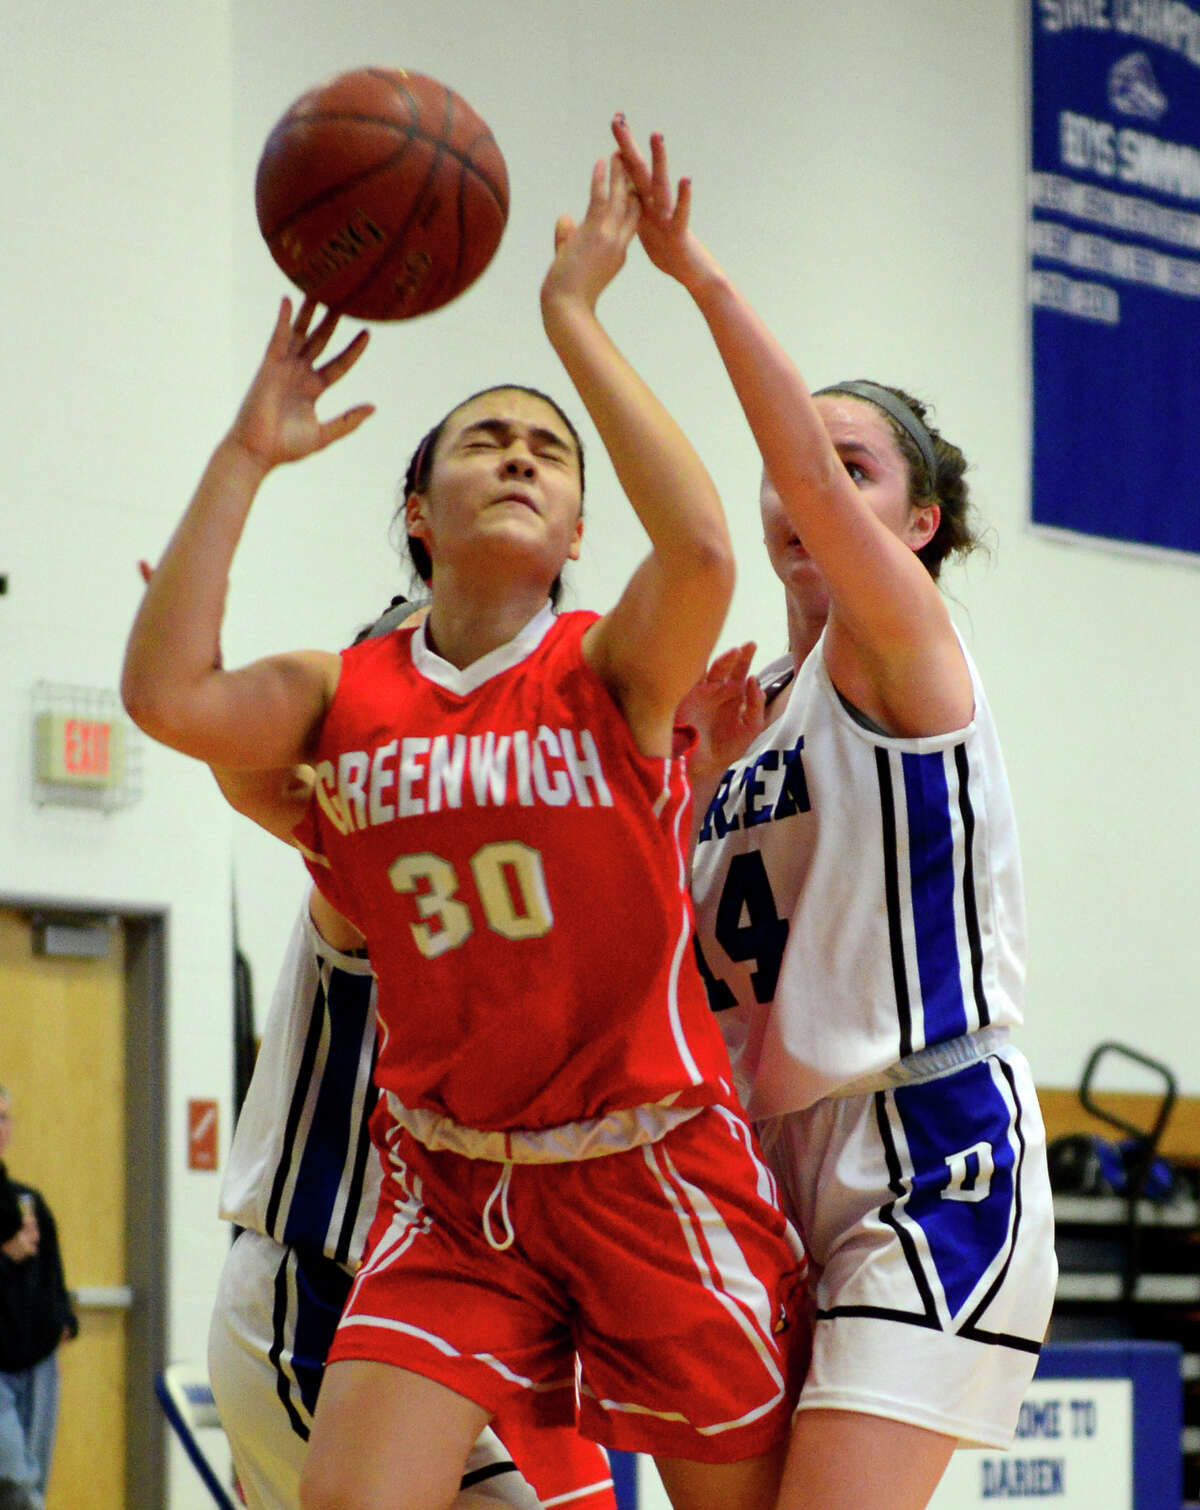 Darien's Emily Coyle, right, disrupts a shot attempt by Greenwich's Kimberly Kockenmeister, during Tony LaVista Basketball Tournament action in Darien, Conn. on Saturday Dec. 28, 2014.